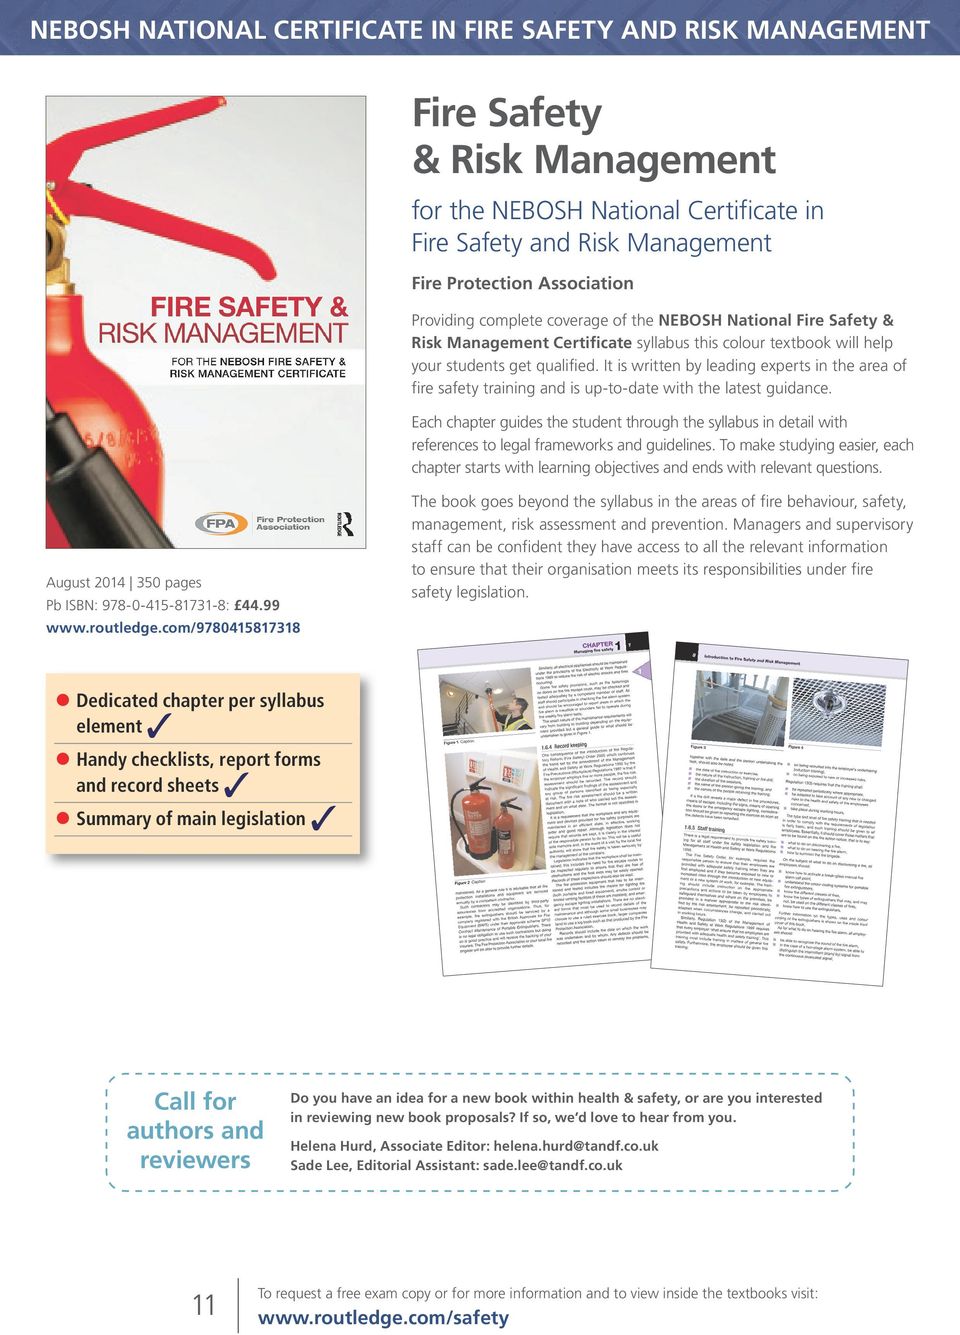 It is written by leading experts in the area of fire safety training and is up-to-date with the latest guidance.